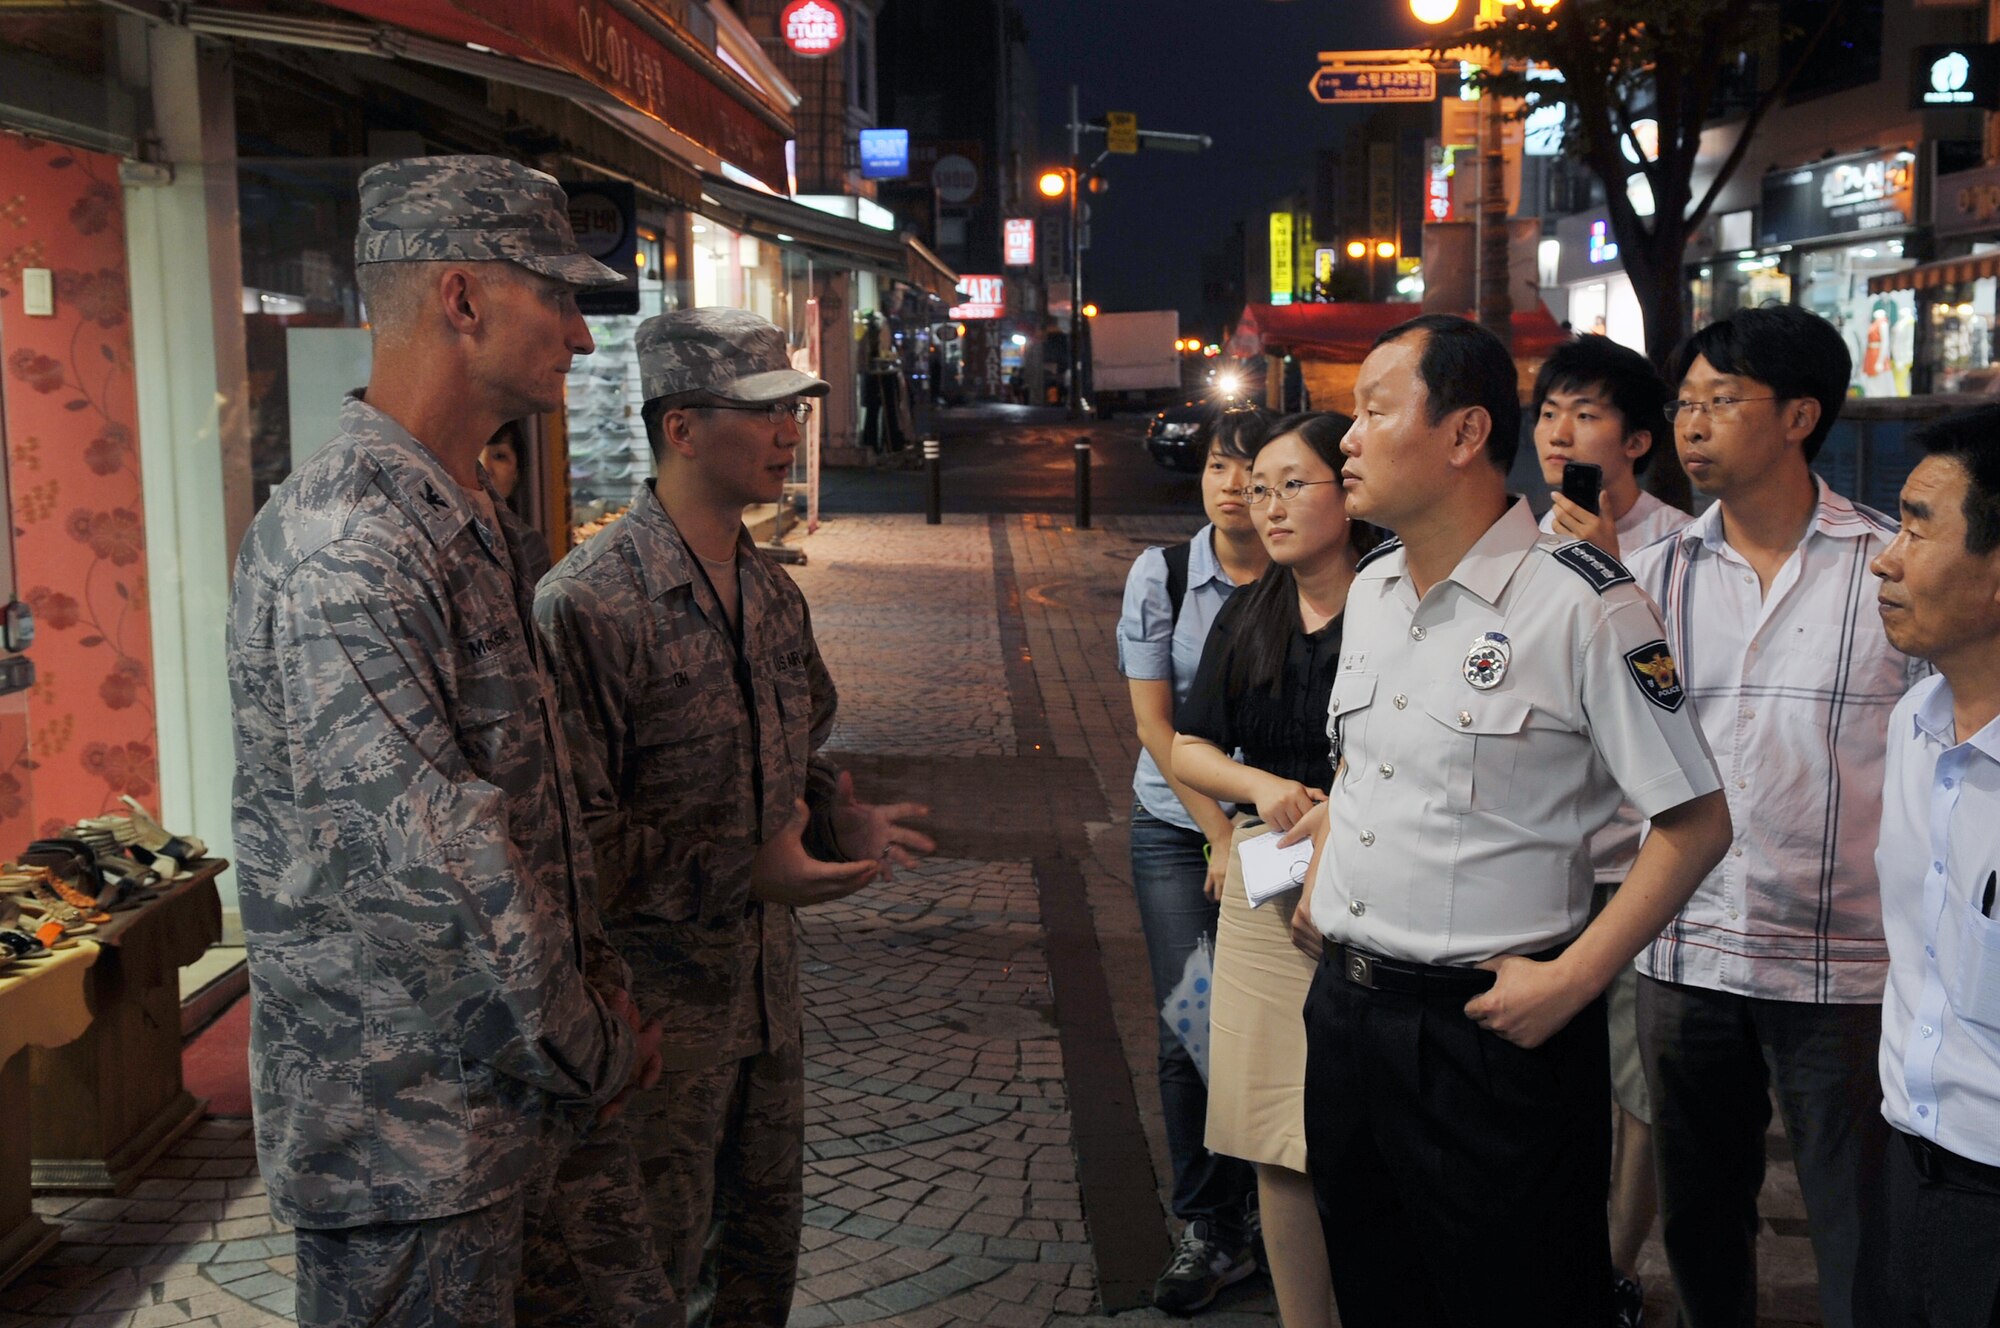 Col. Patrick McKenzie, 51st Fighter Wing commander, listens as Staff Sgt. Daniel Oh, 51st Medical Group independent duty medical technician, translates to city officials July 10, 2012, during a joint town patrol in Songtan Entertainment District, Pyeongtaek, Republic of Korea. Joint town patrols strengthen the alliance between the ROK and United States. The patrol also highlighted the importance of joint partnership. (U.S. Air Force photo/Staff Sgt. Craig Cisek)